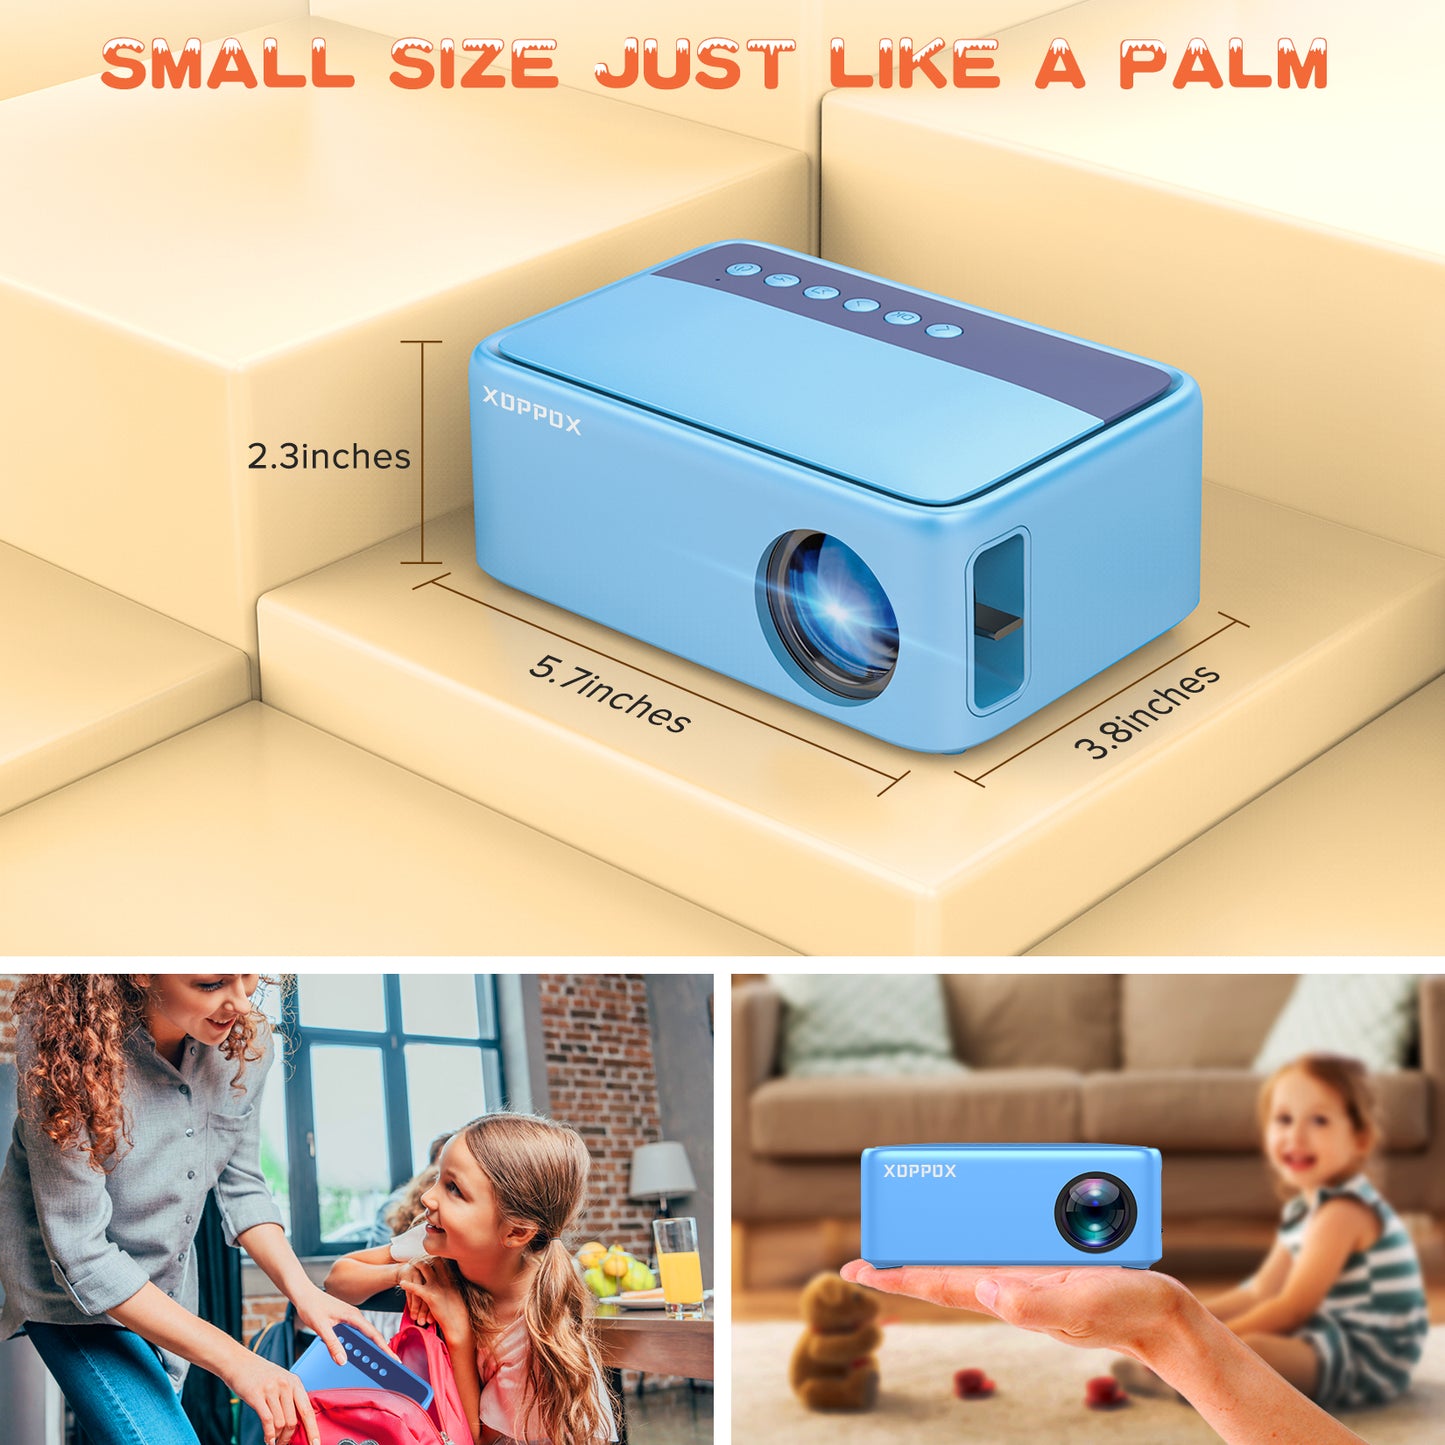 Mini Video Projector for Cartoon, Portable Outdoor Movie Projector for Kids Gifts, XOPPOX Small Home Theater Projector for Phone with HDMI USB AV Interfaces